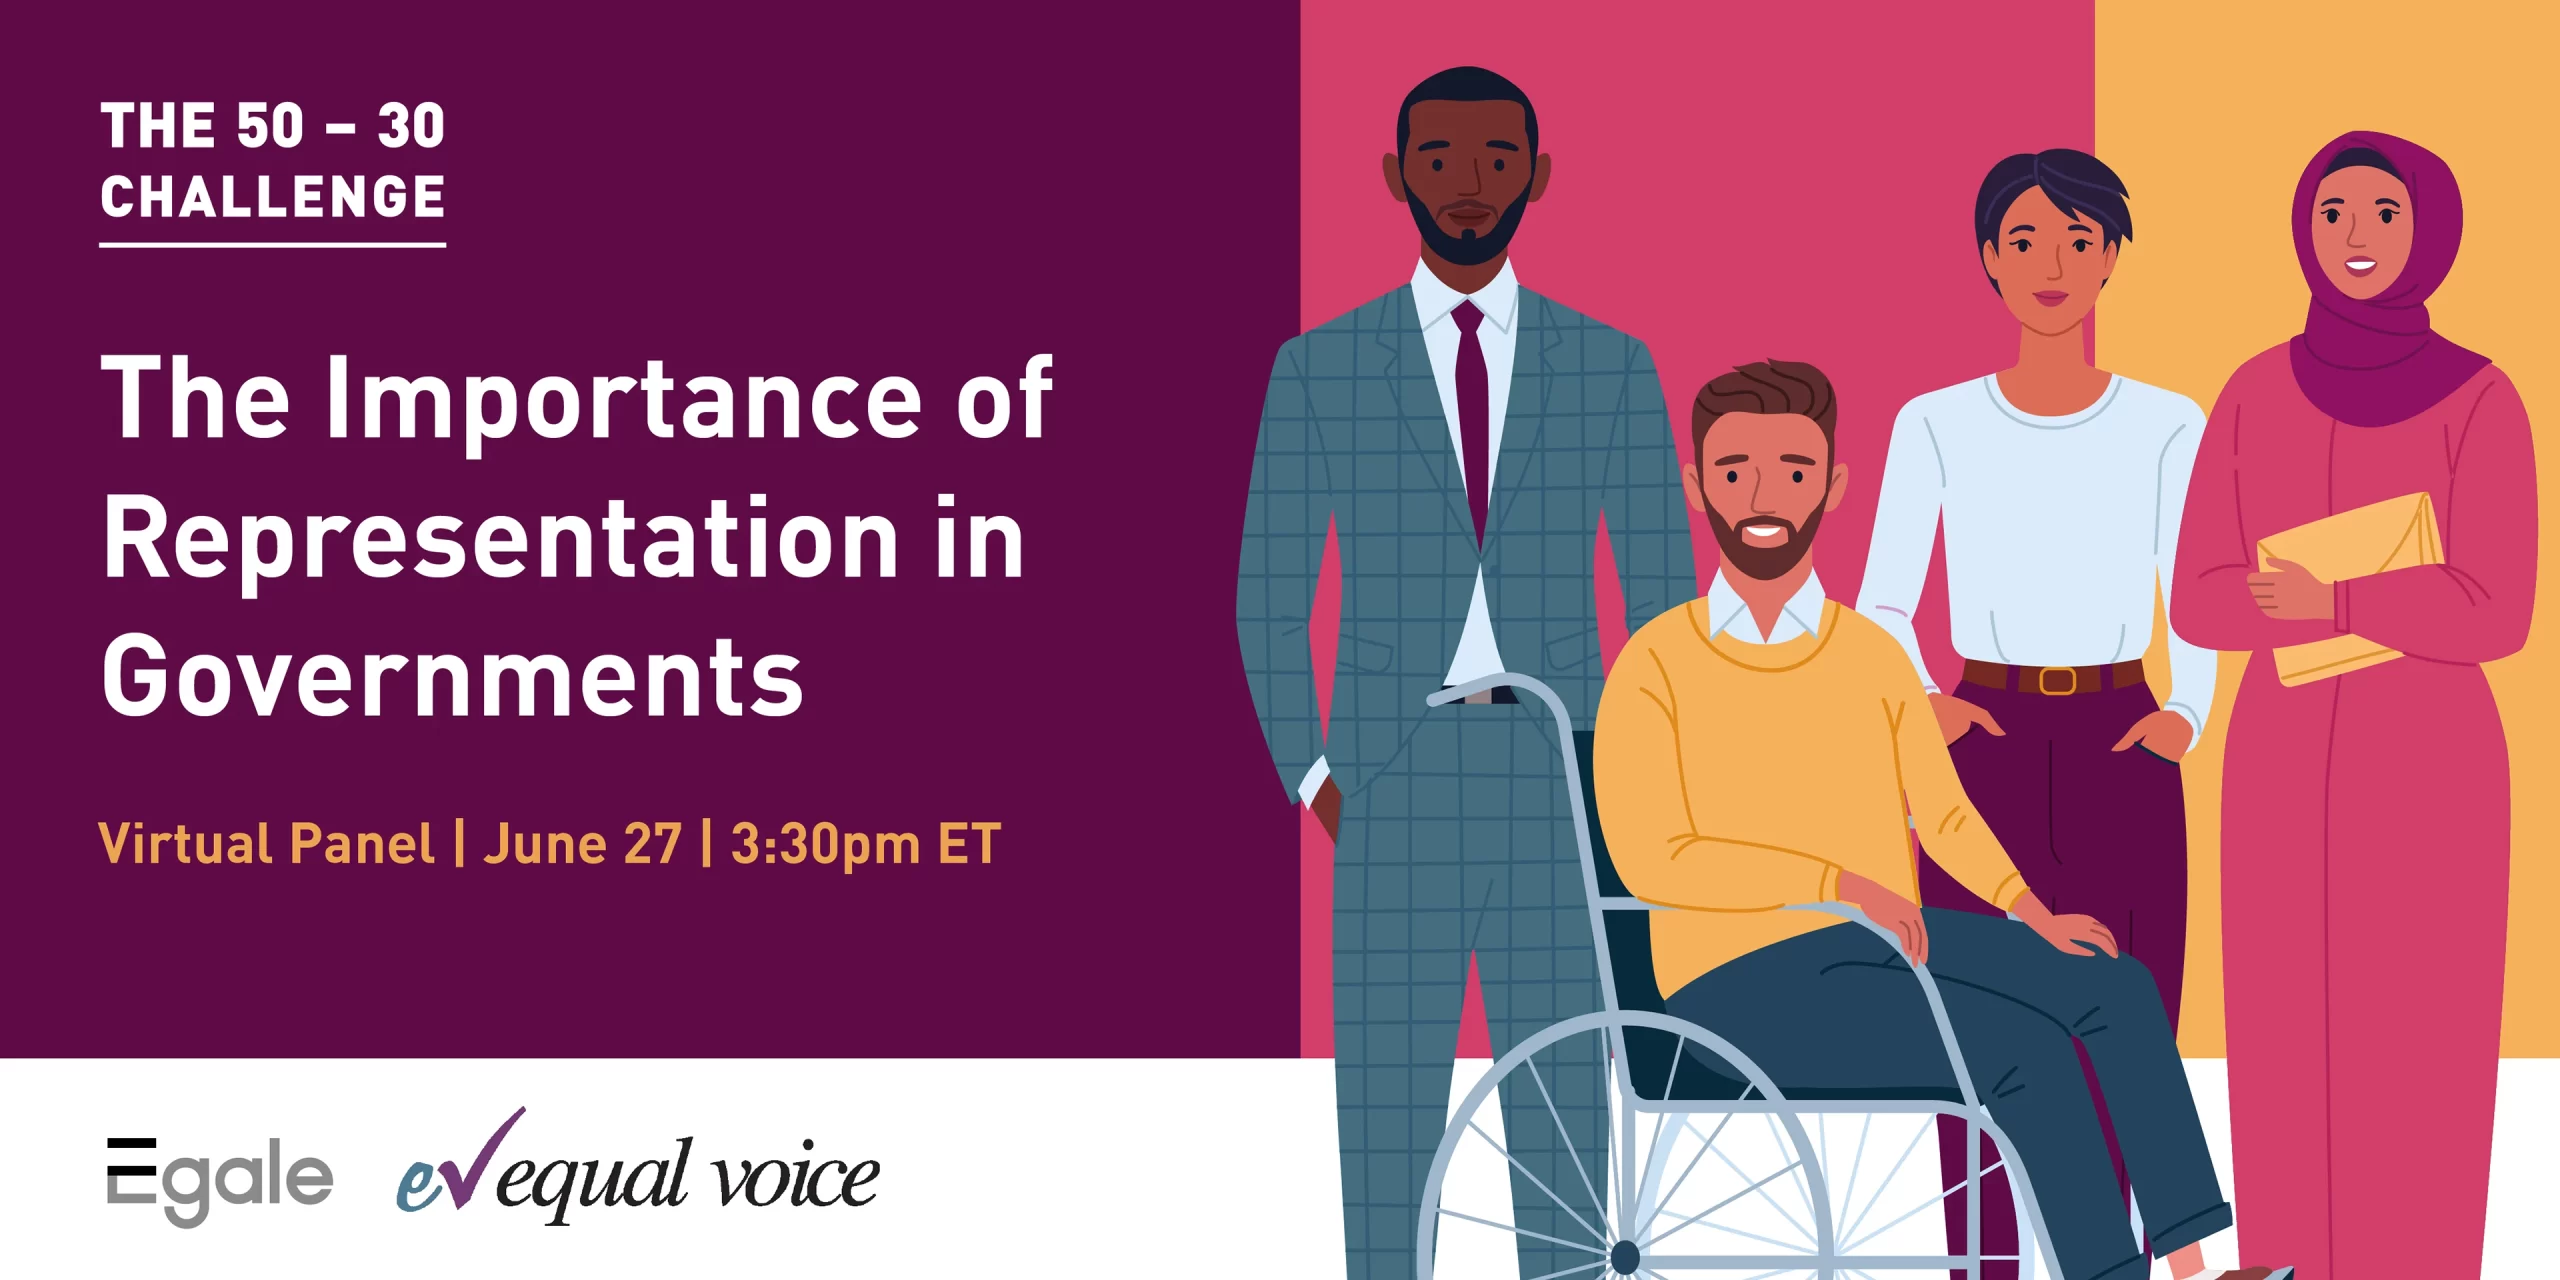 The 50-30 Challenge: The Importance of Representation in Governments. Virtual Panel, June 27, 3:30pm ET - Egale, equal voice. Illustrations of a diverse group of people.